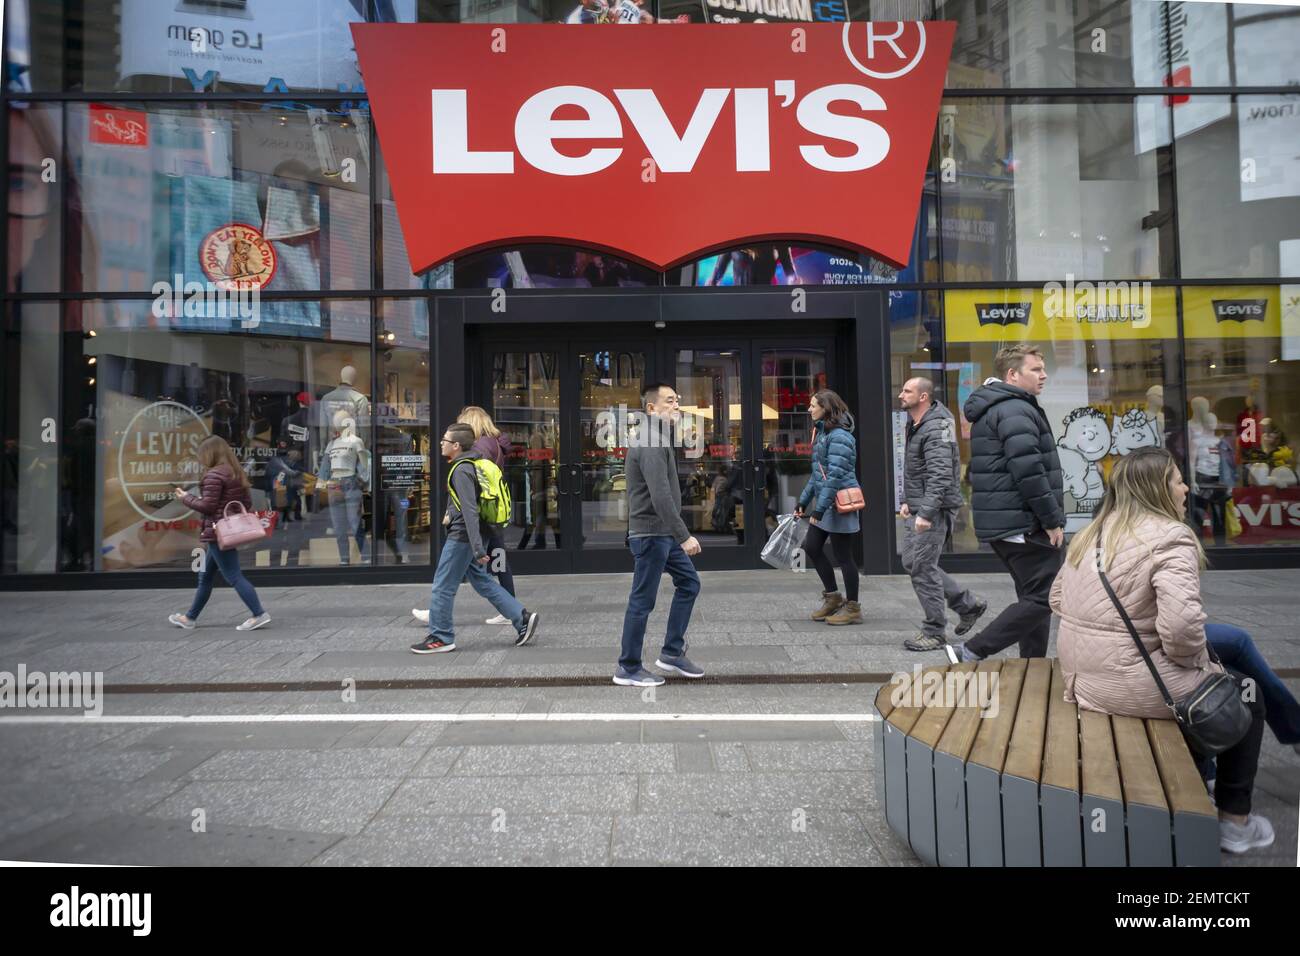 The Levi Strauss and Co. flagship store in Times Square in New York on  Tuesday, March 19, 2019. Levi Strauss & Co. announced that they will open  100 new stores over the